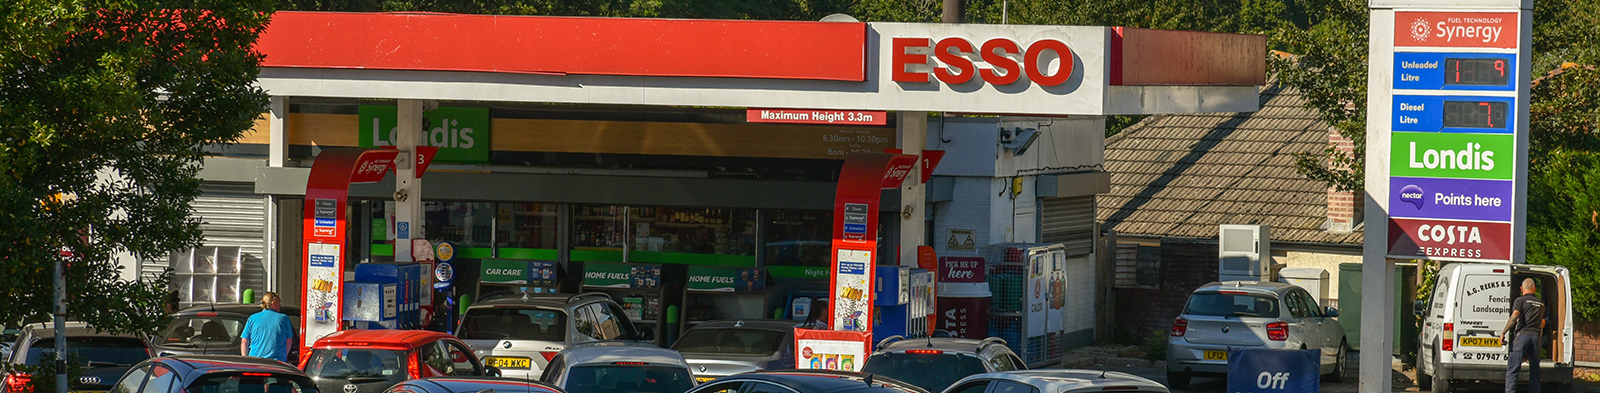 Cars queuing at a petrol station along the road